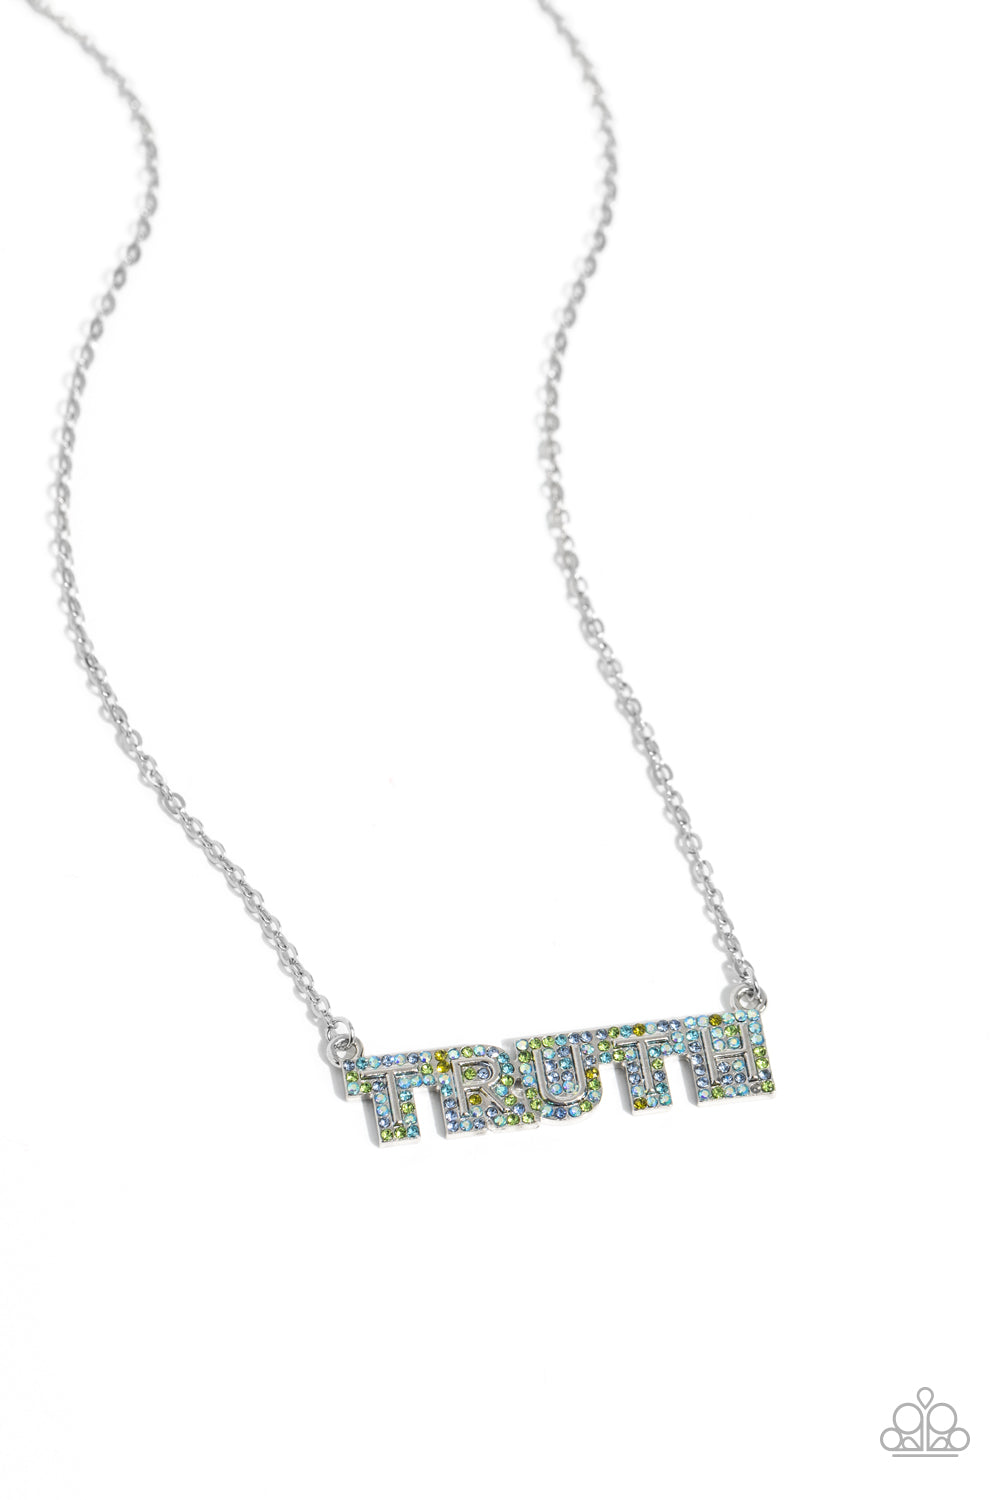 Truth Trinket Blue Necklace - Paparazzi Accessories  Encrusted in glassy olive, Montana, aquamarine, and blue iridescent rhinestones, the silver word "TRUTH" connects to a dainty silver chain, creating an inspirational pendant below the collar. Features an adjustable clasp closure. Due to its prismatic palette, color may vary.  Sold as one individual necklace. Includes one pair of matching earrings.  P2WD-BLXX-199XX